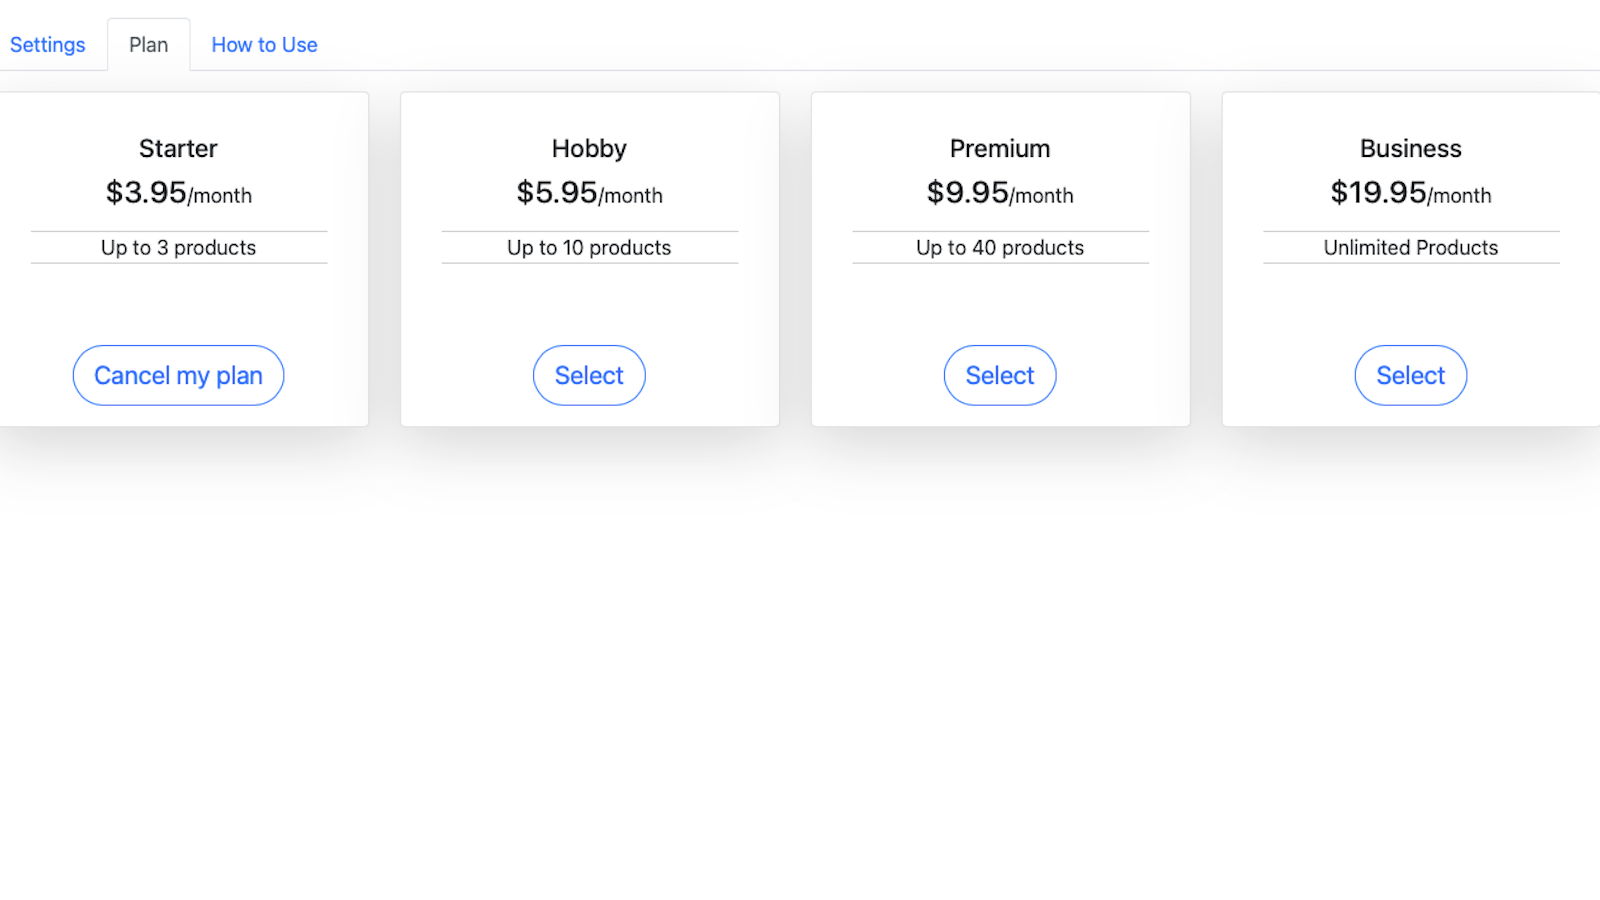 Multiselect Pricing Plans